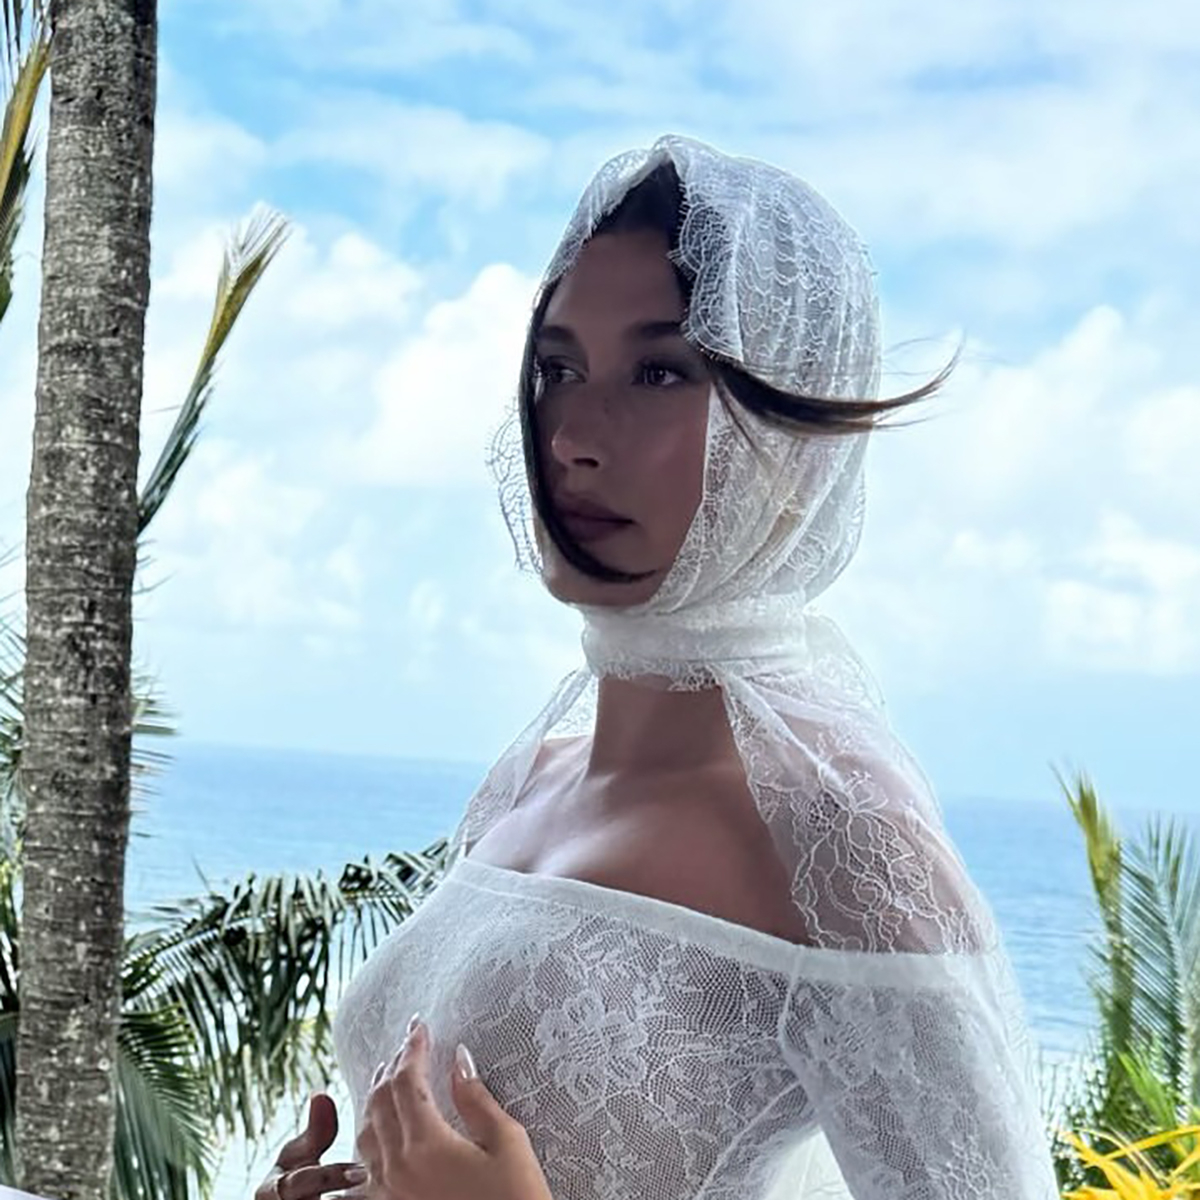 Pregnant Hailey Bieber Shares Beind-the-Scenes Maternity Shoot Photo